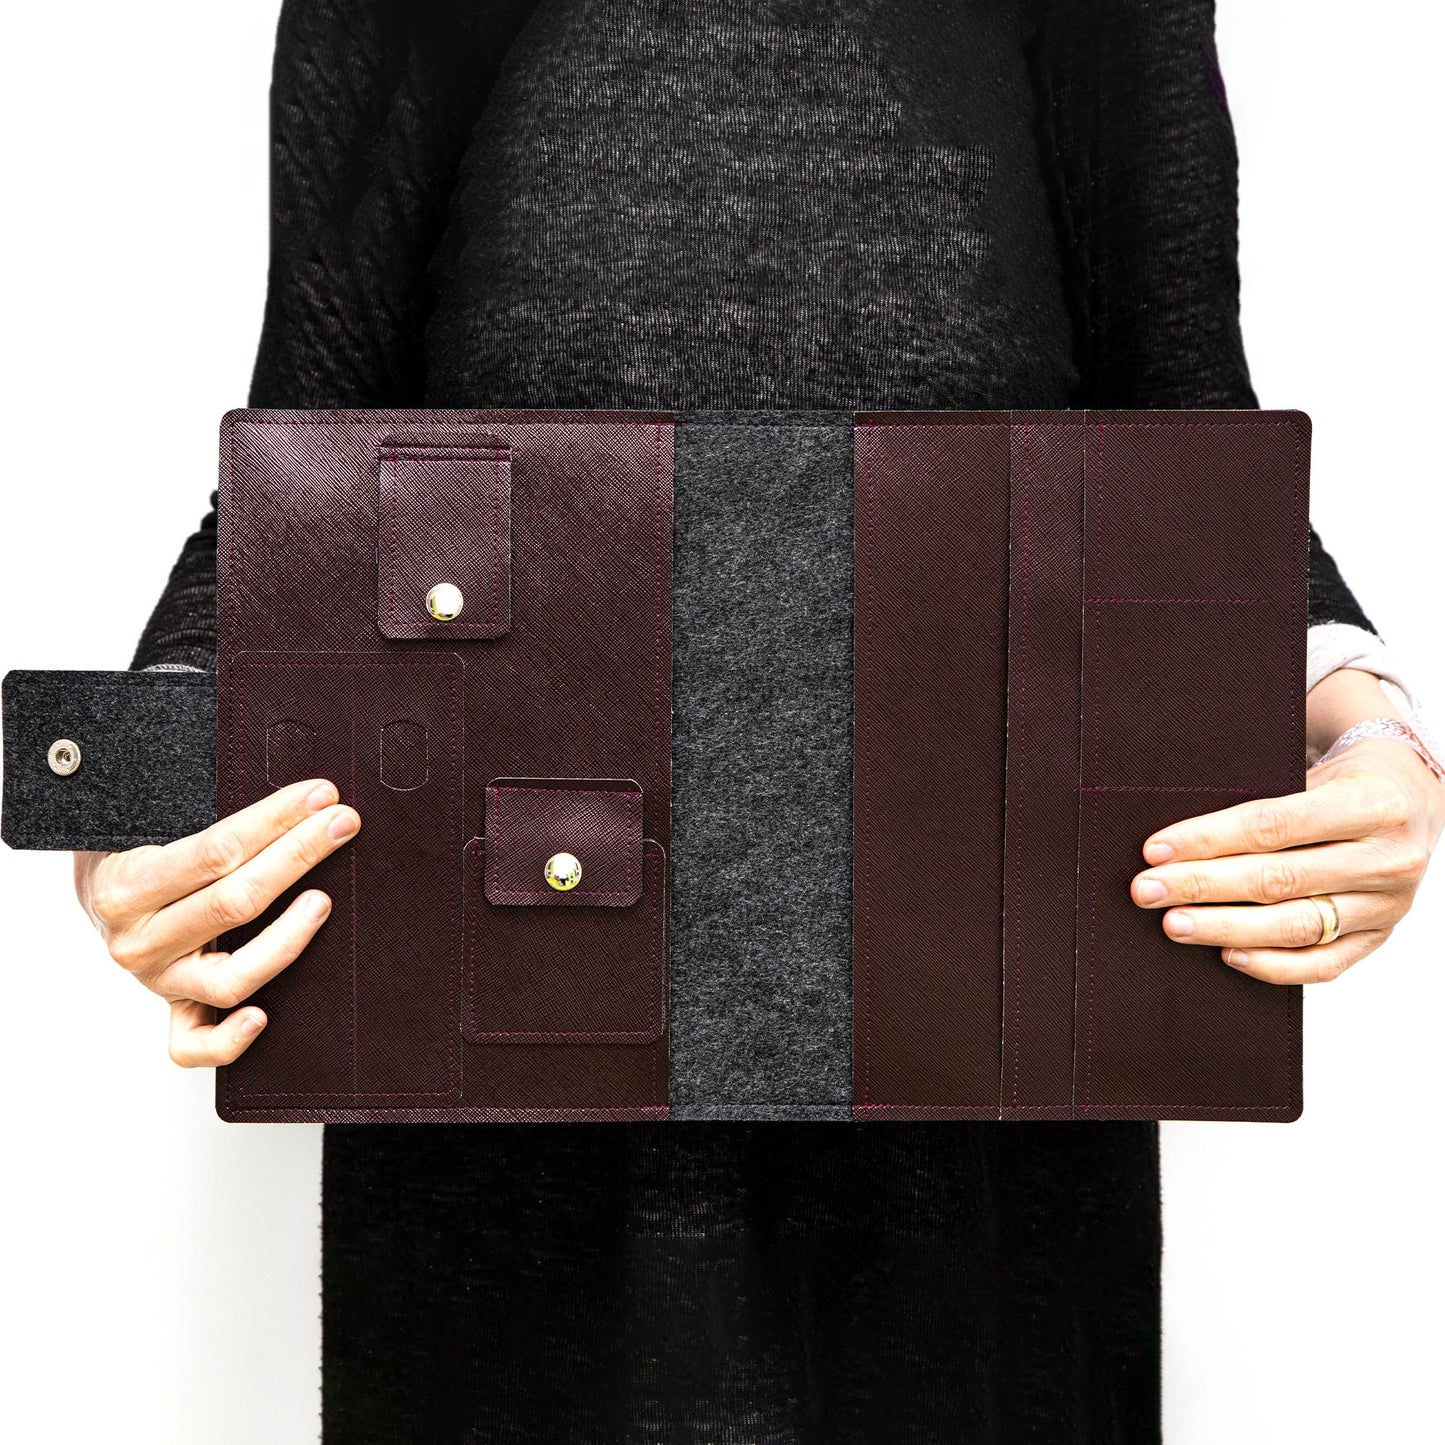 Handmade Folio Cover for iPad/Pro/Air - Egg Plant Faux Leather